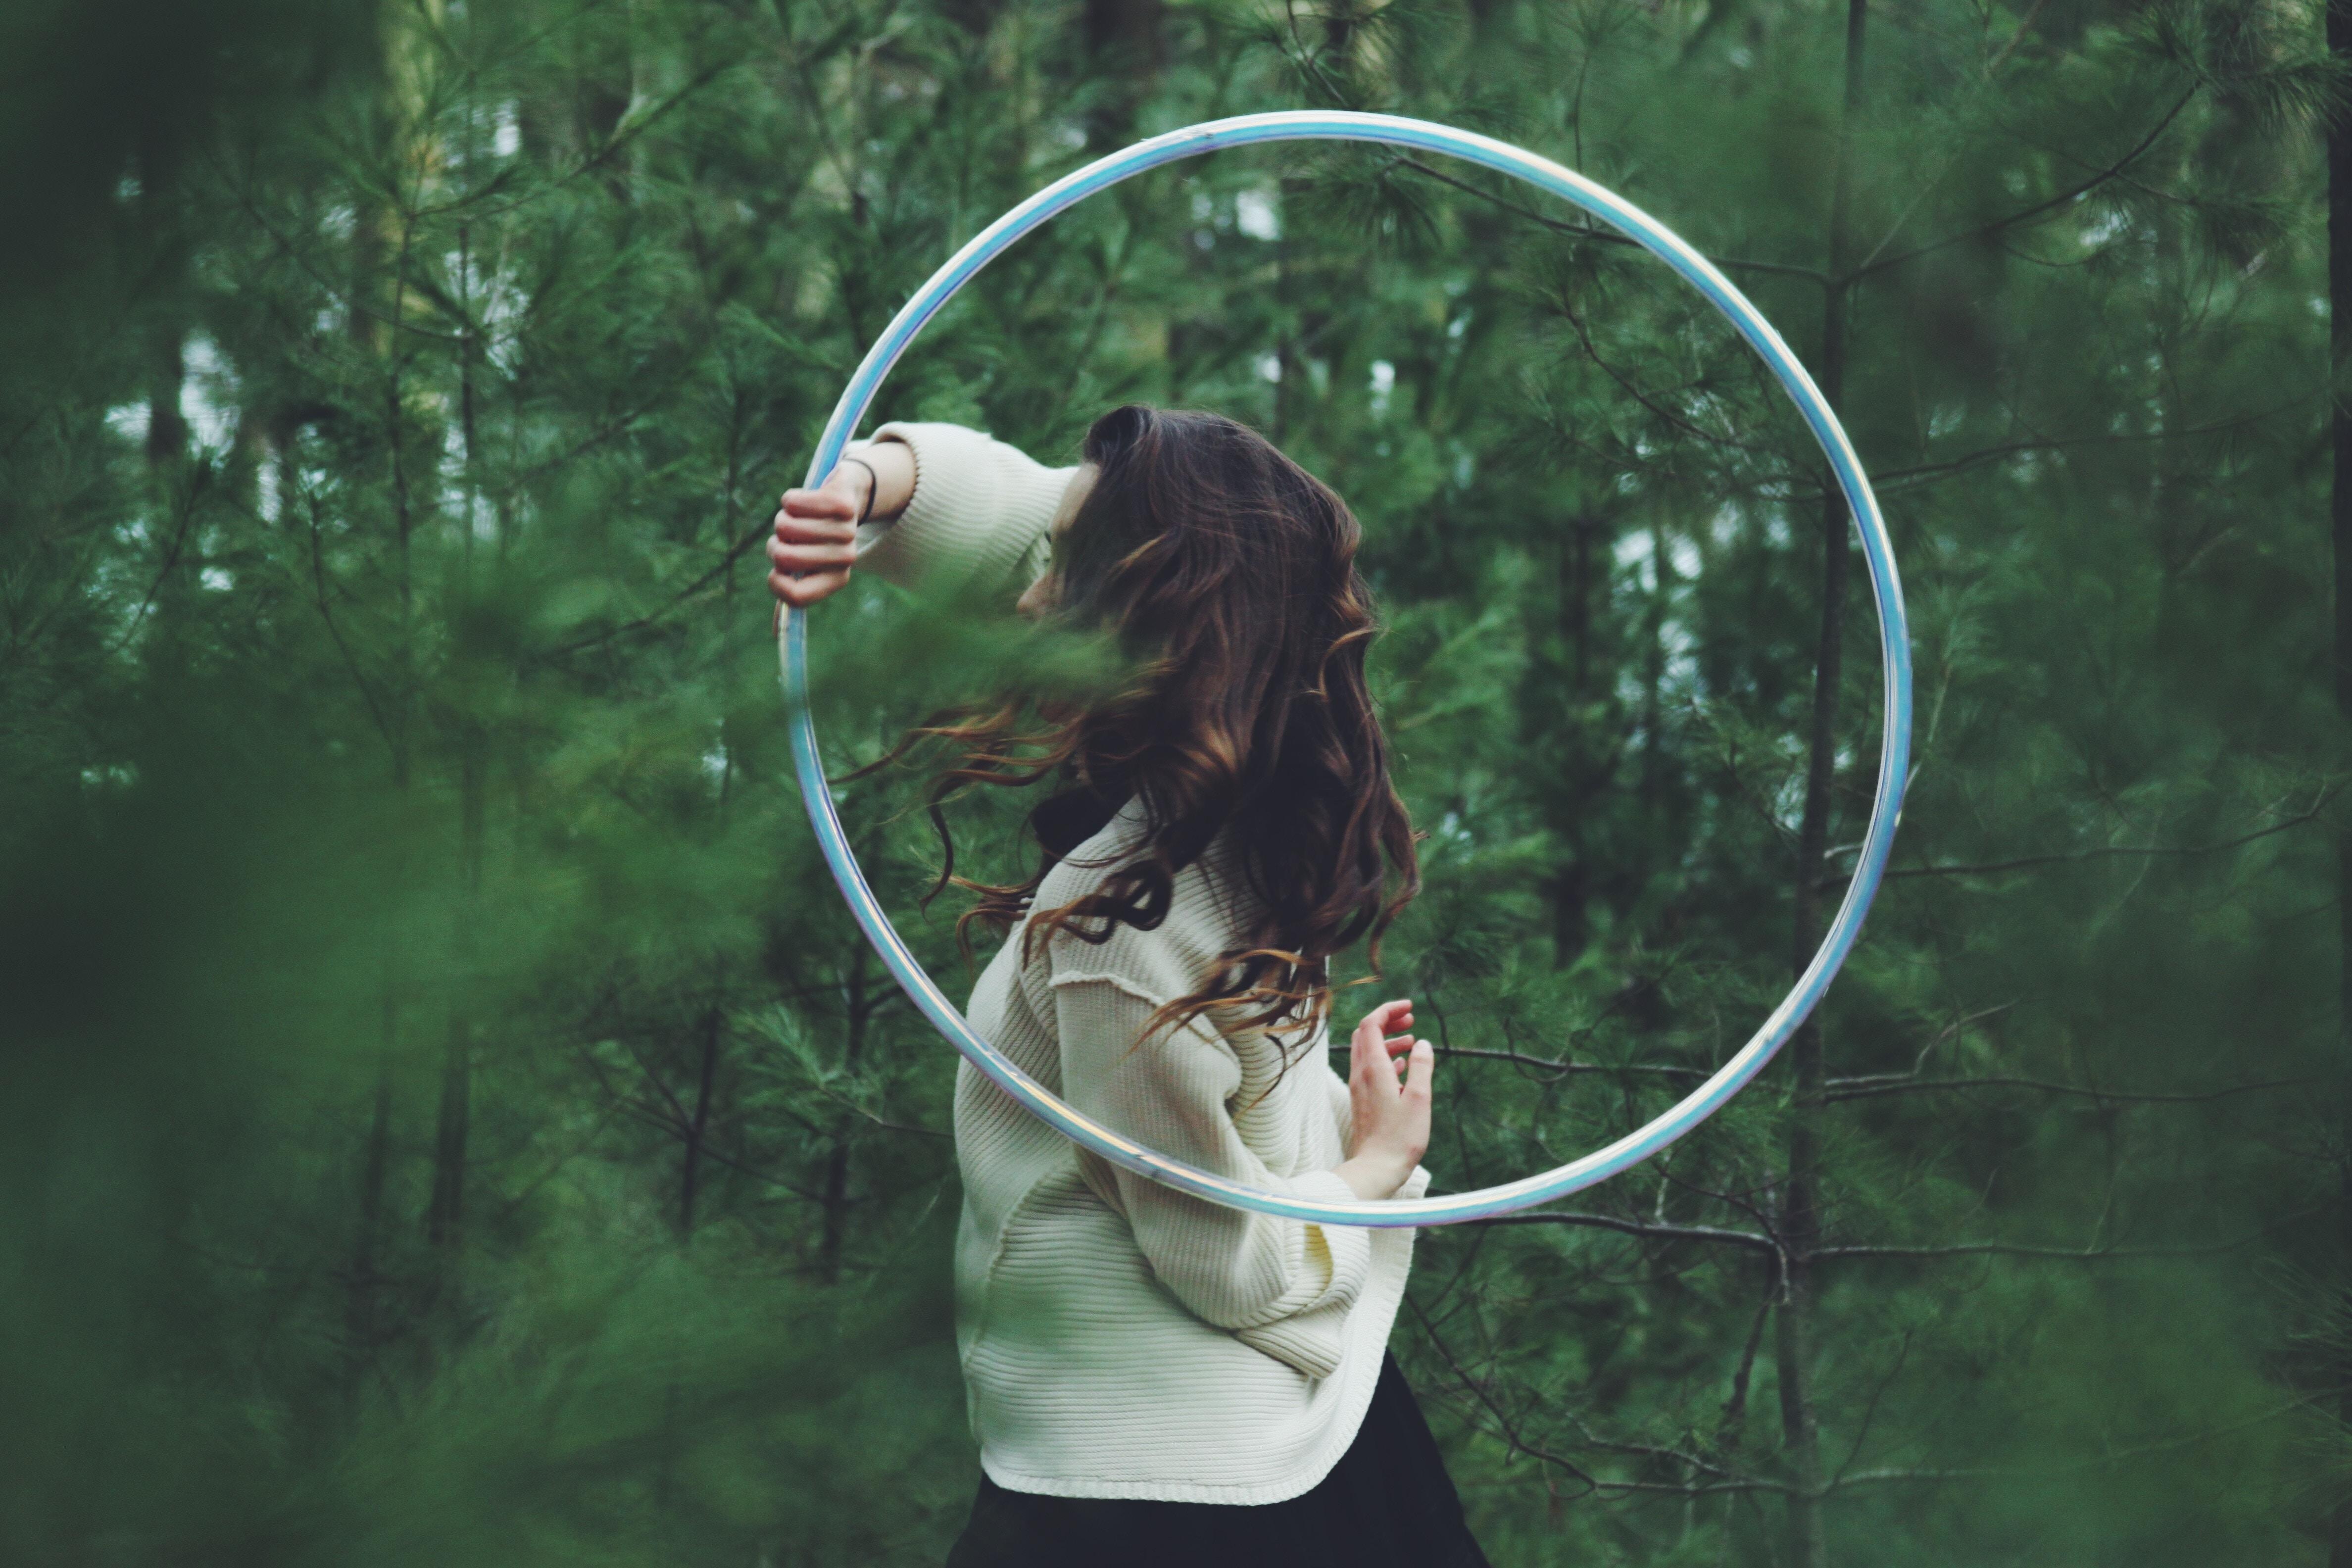 #plant, #female, #hoop, #blur, #holding, #forest